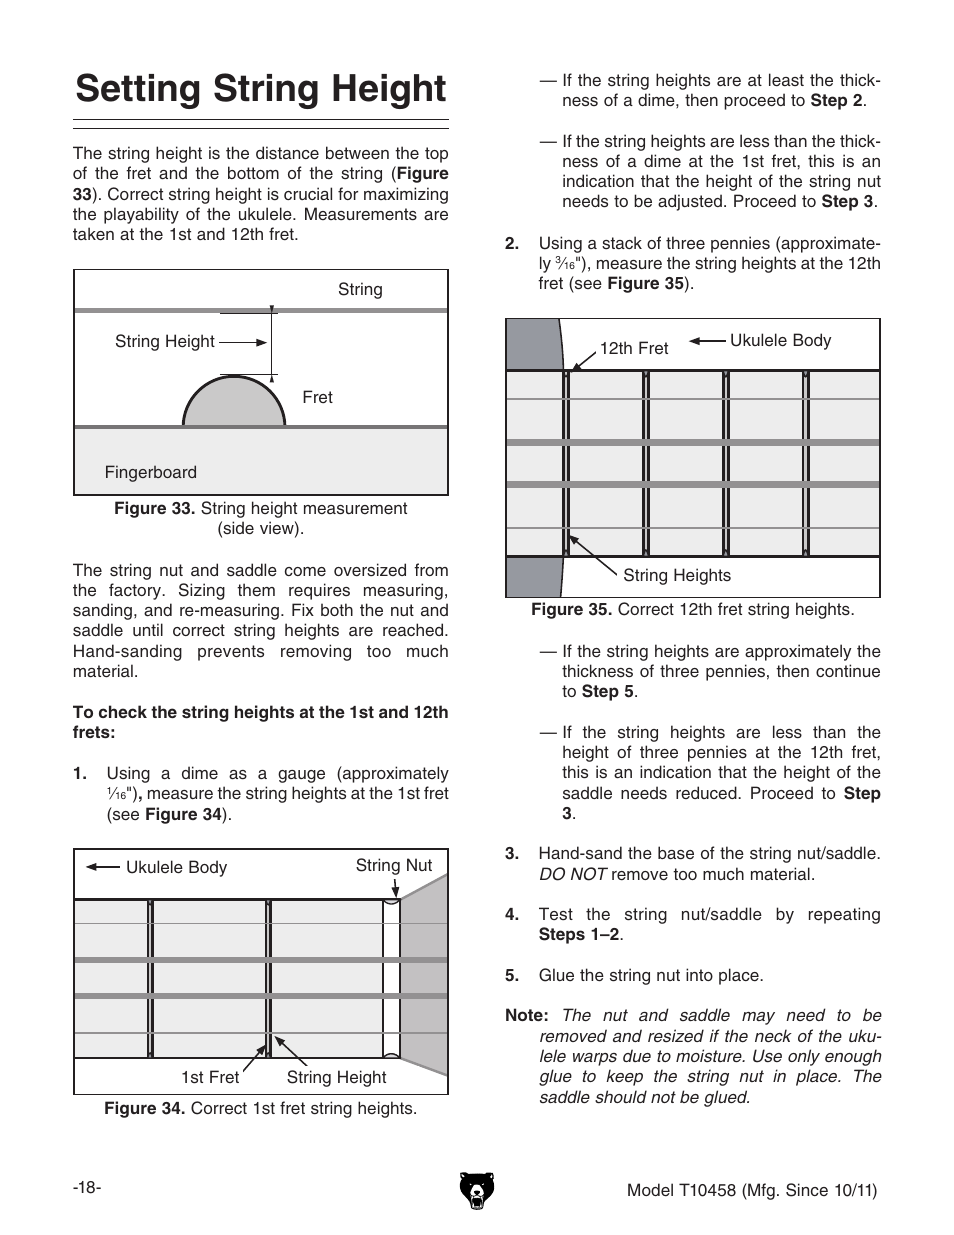 Setting string height | Grizzly SOPRANO UKULELE KIT T10458 User Manual |  Page 20 / 24 | Original mode